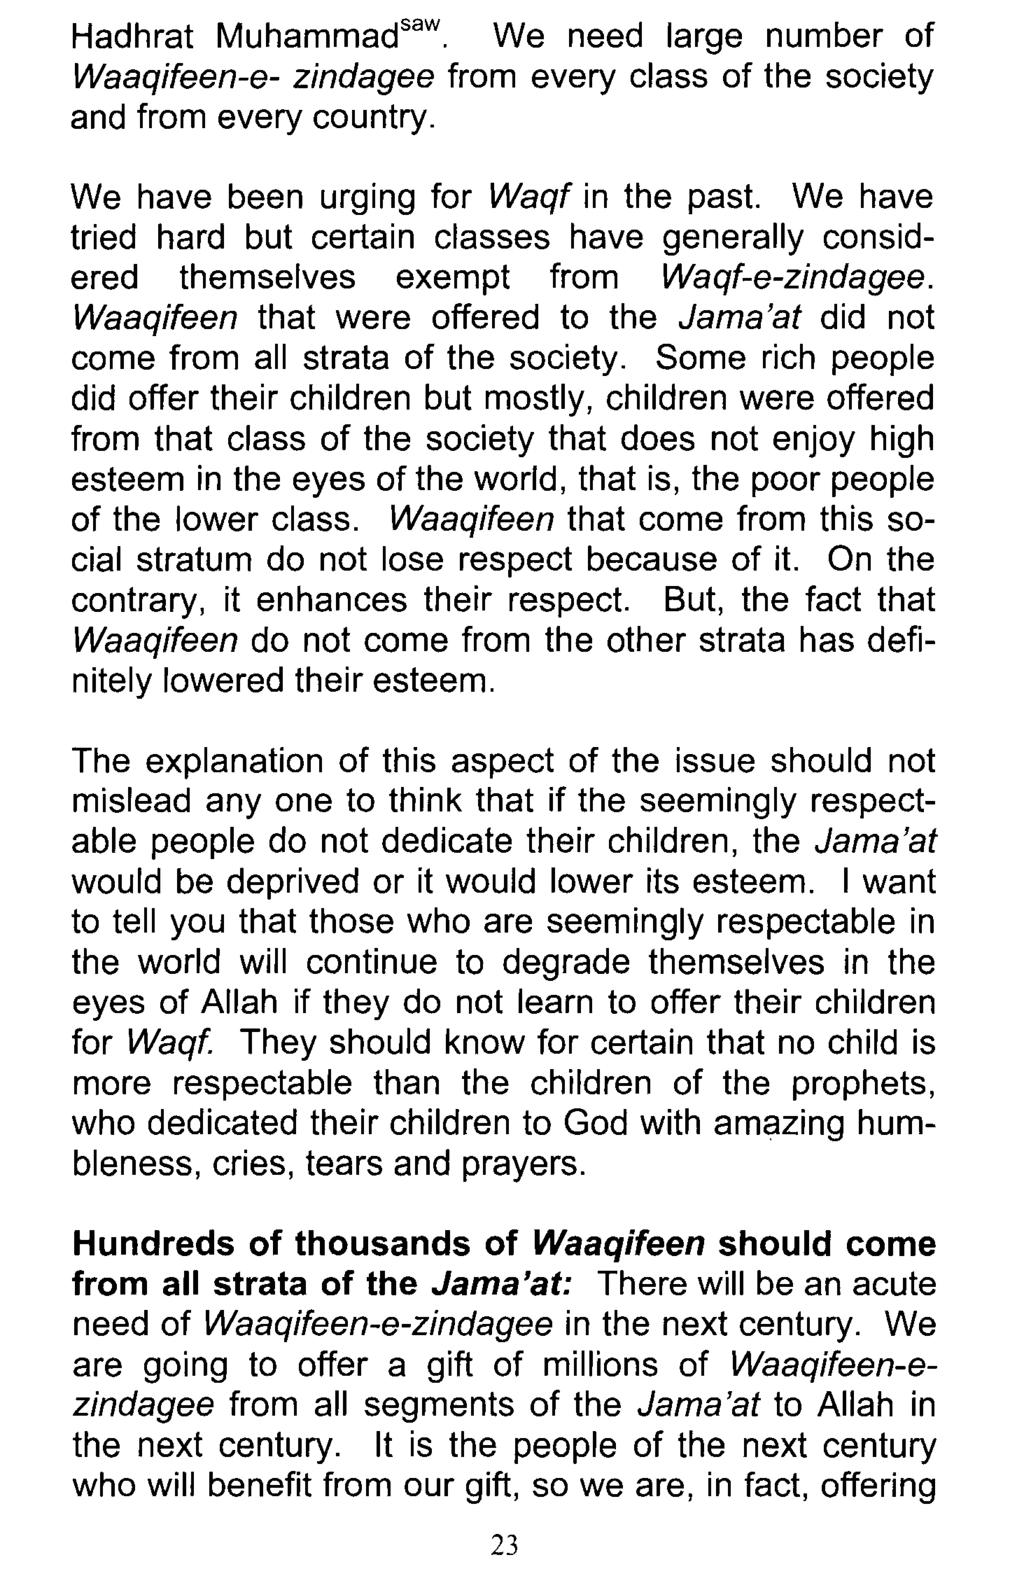 Hadhrat Muhammad saw. We need large number of Waaqifeen-e- zindagee from every class of the society and from every country. We have been urging for Waqf in the past.